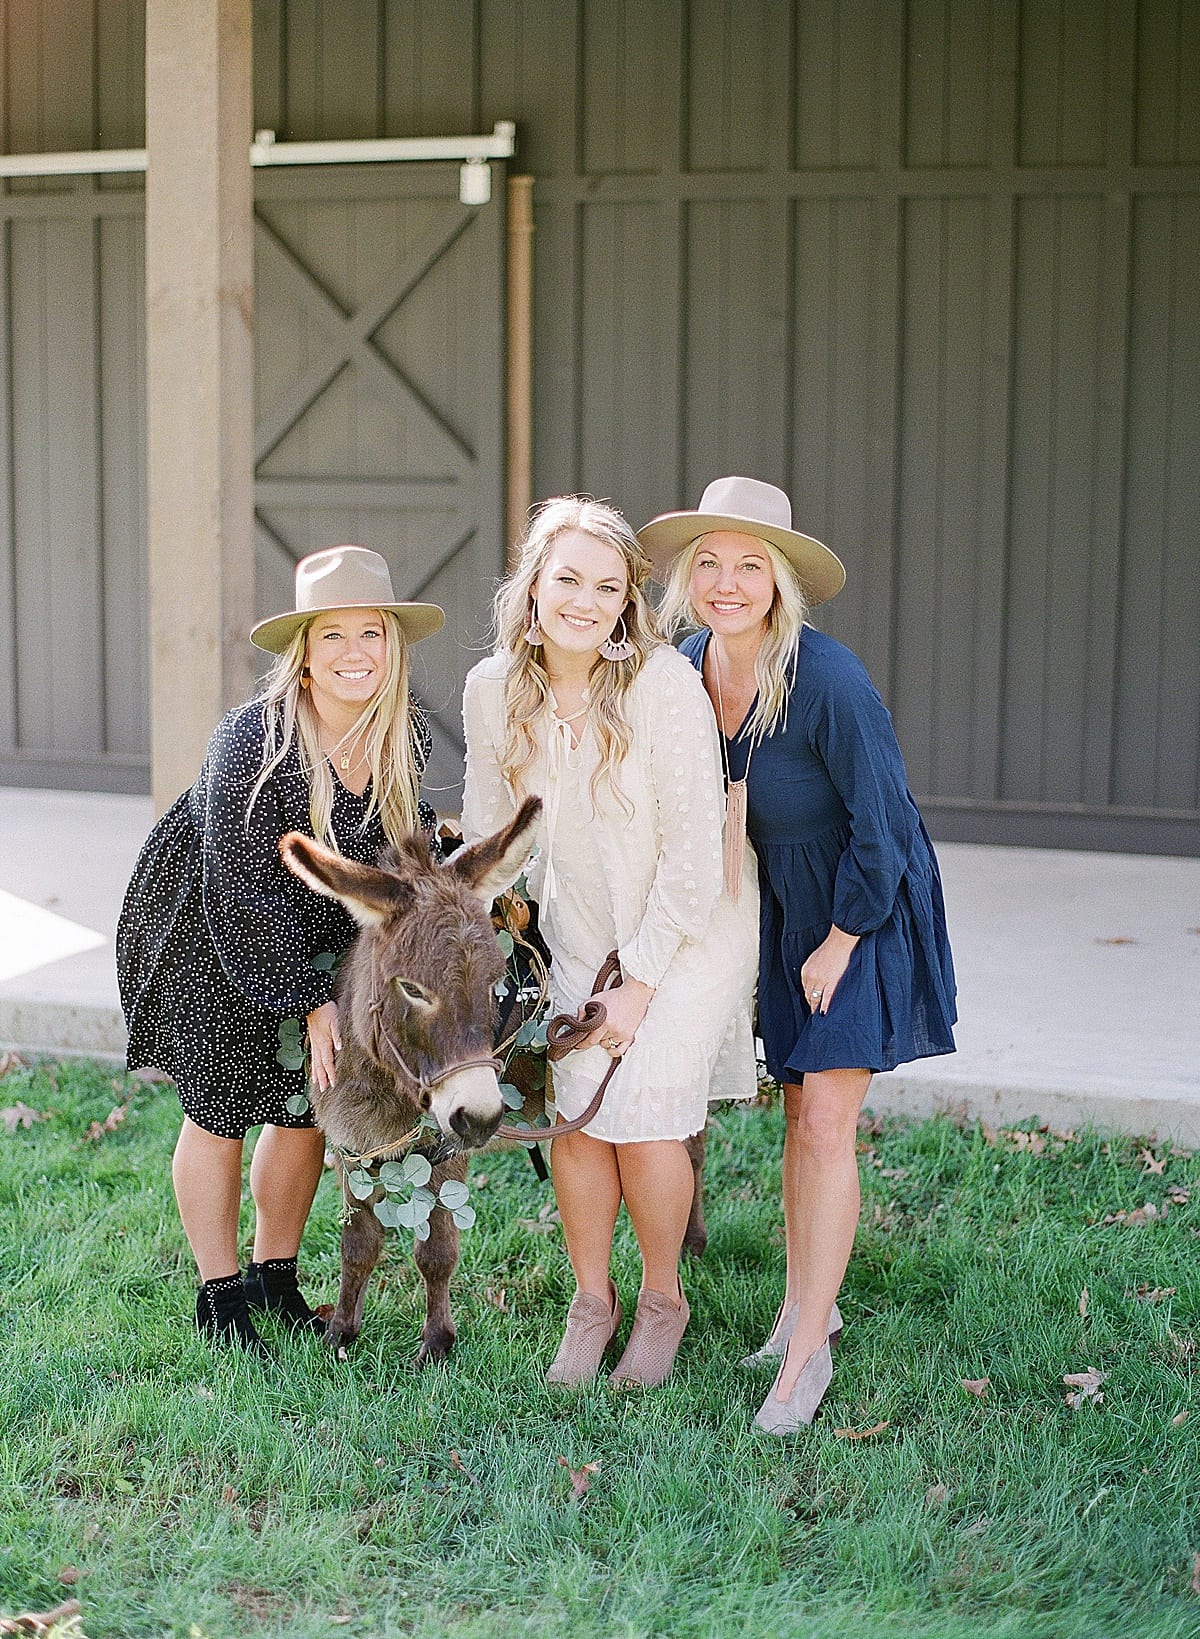 Bride with Friends at Bridal Shower With Donkey Photo